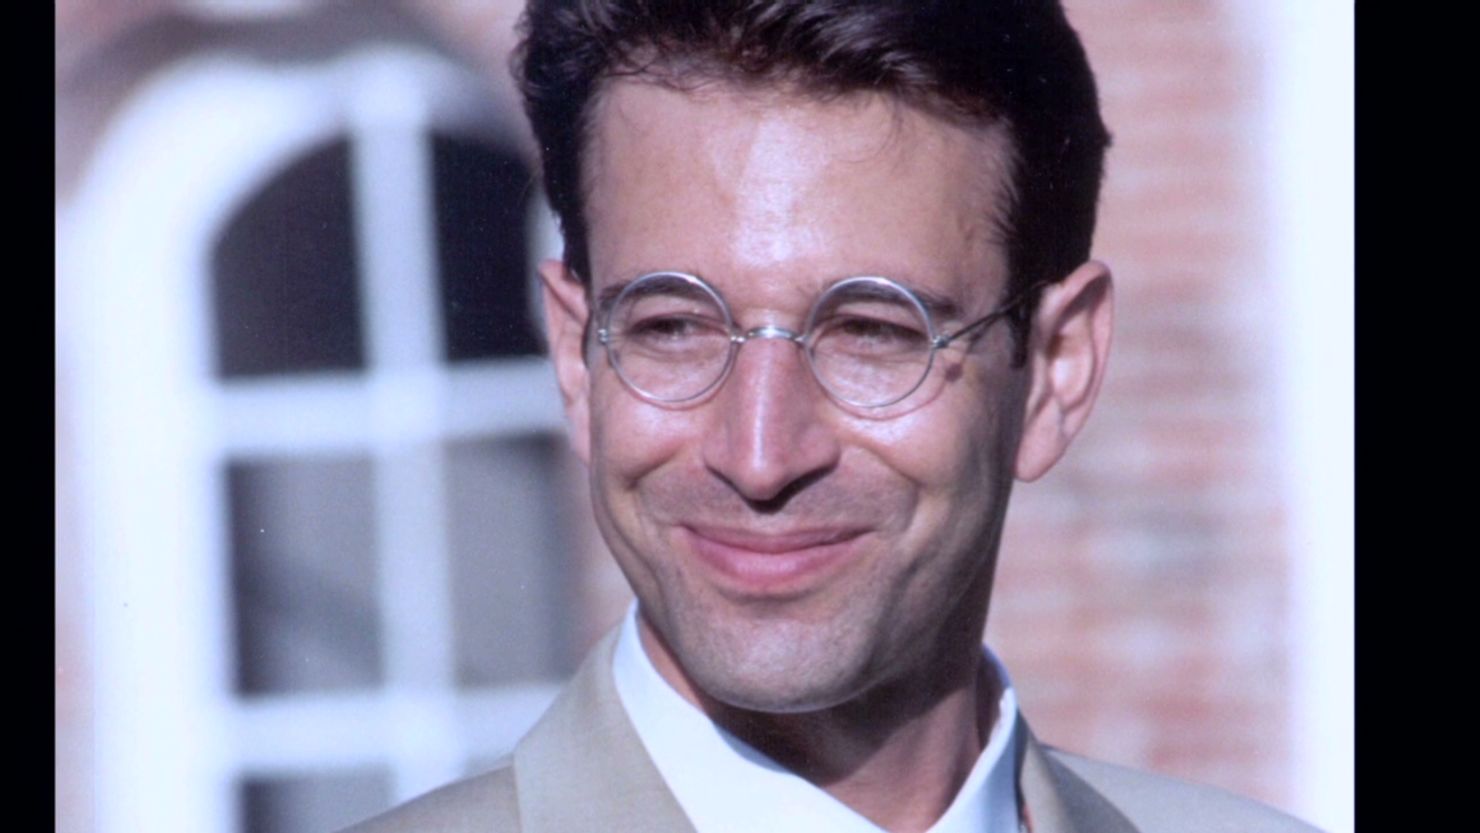 Wall Street Journal reporter Daniel Pearl was kidnapped and killed in Pakistan in 2002.